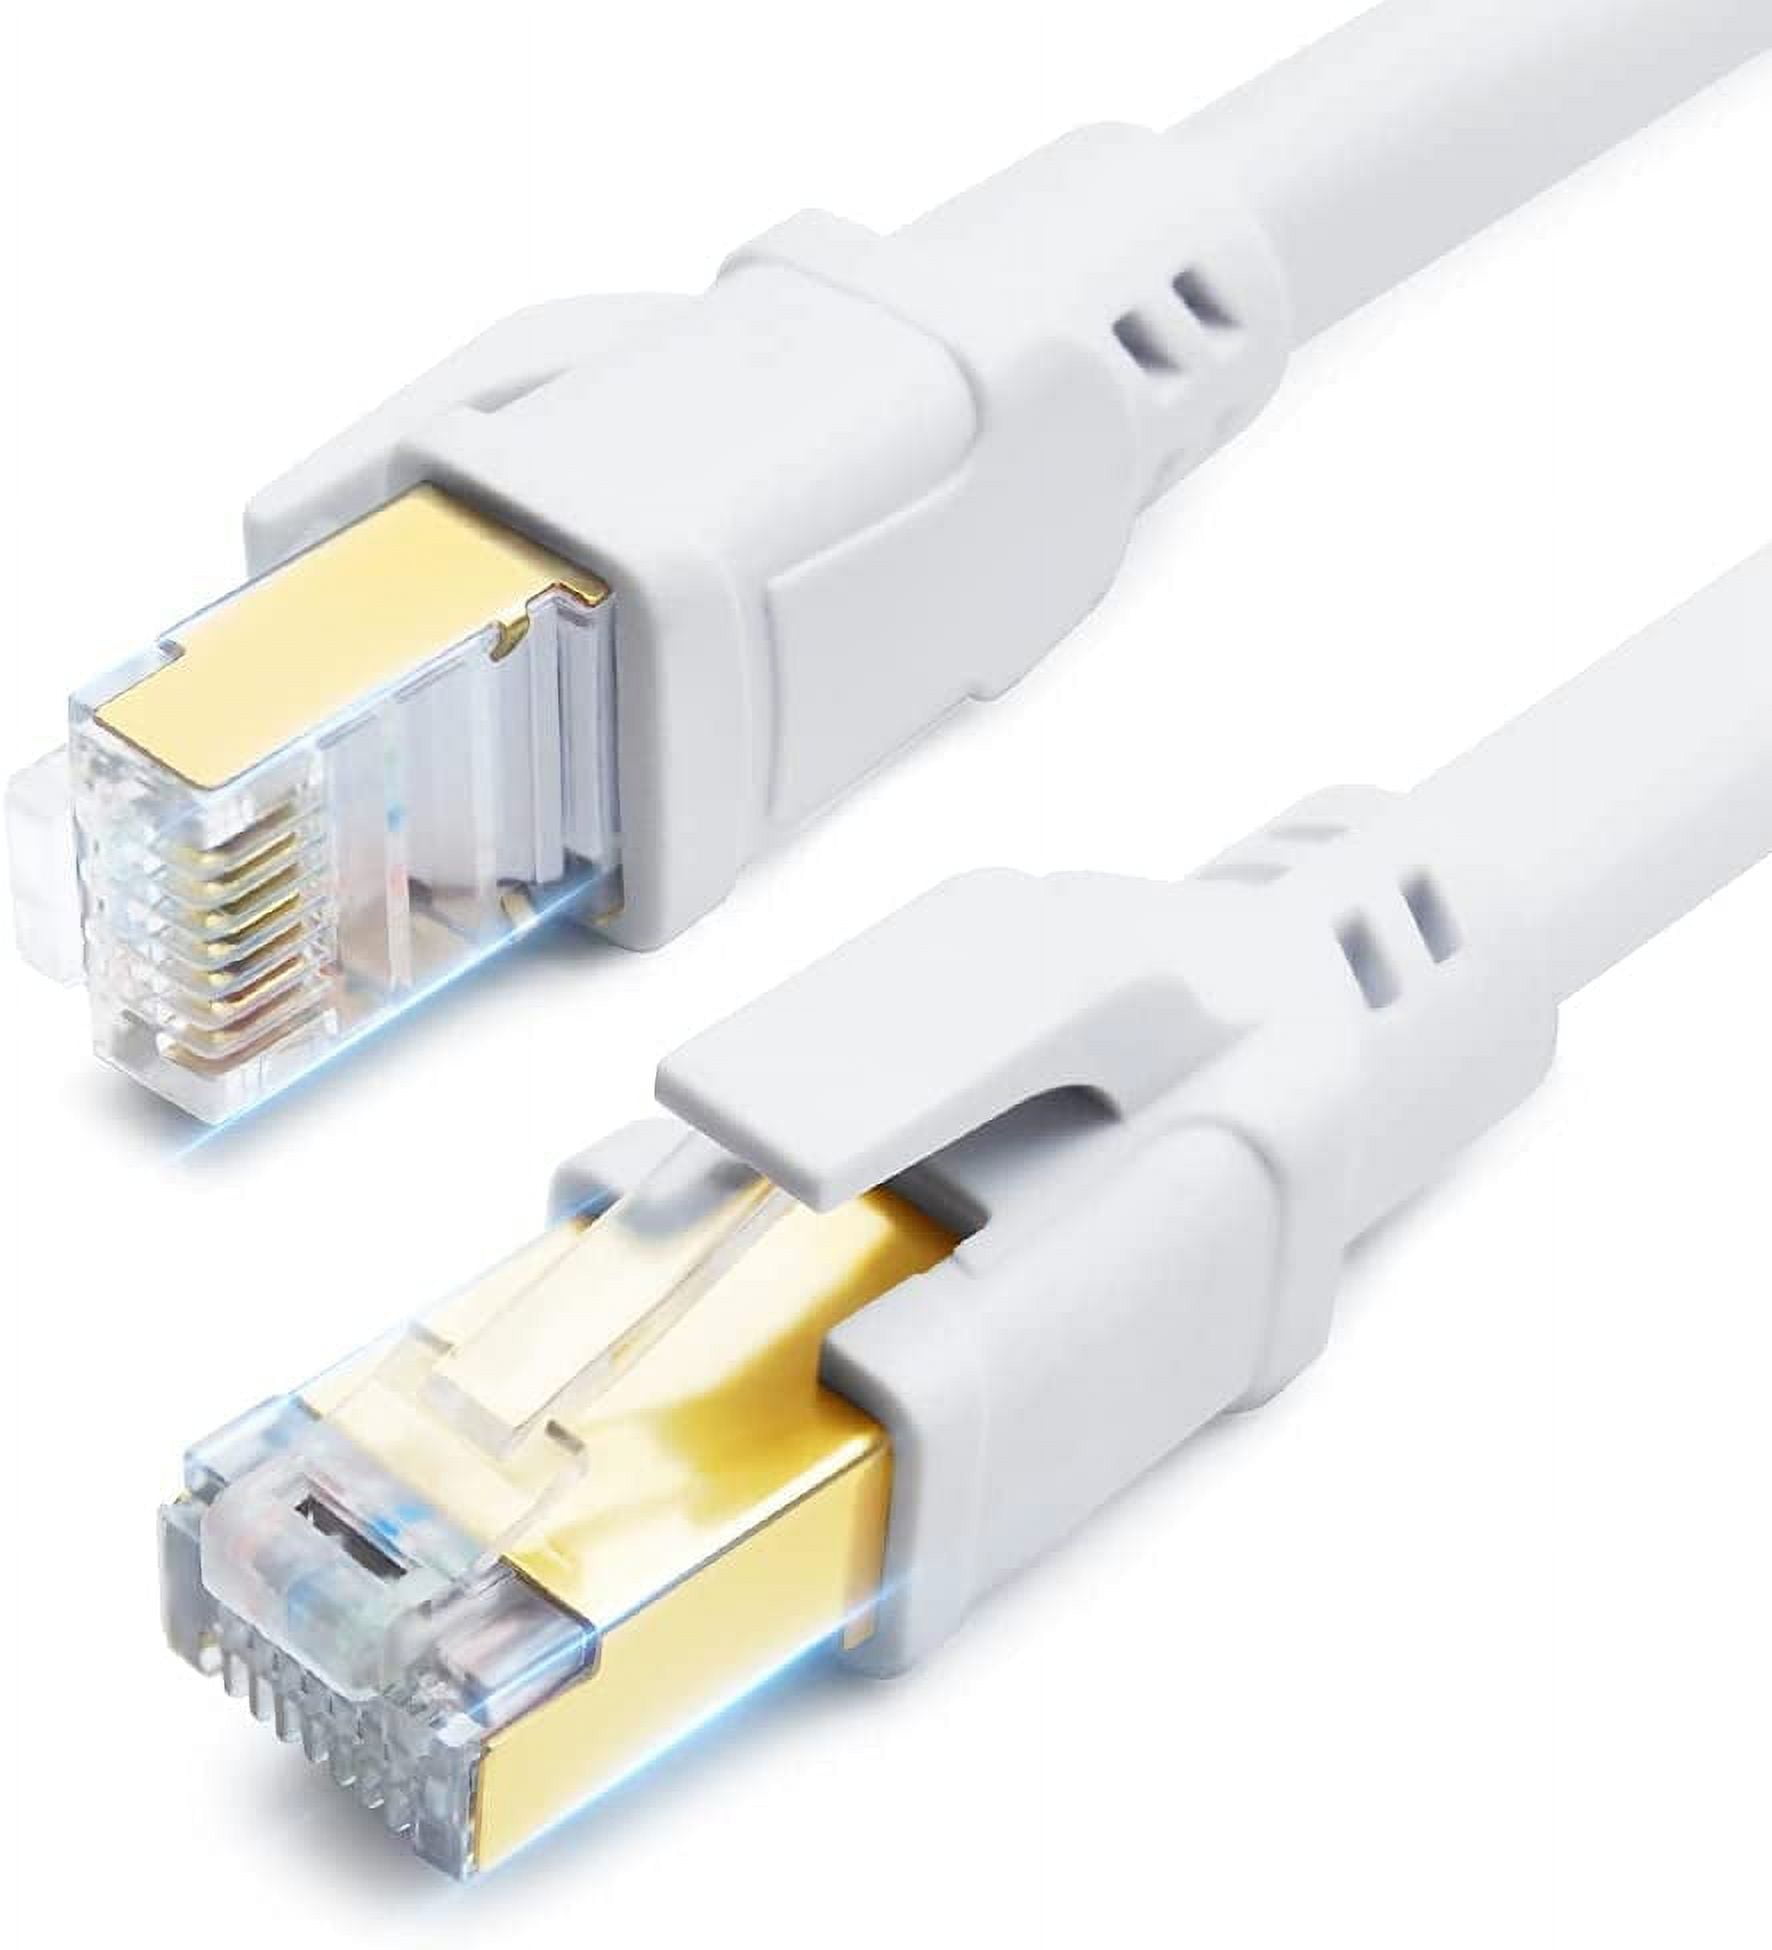 CAT 8 Ethernet Cable 82ft, Indoor & Outdoor, High Speed 40Gbps 2000MHz SFTP  Internet Cable with Gold Plated RJ45 